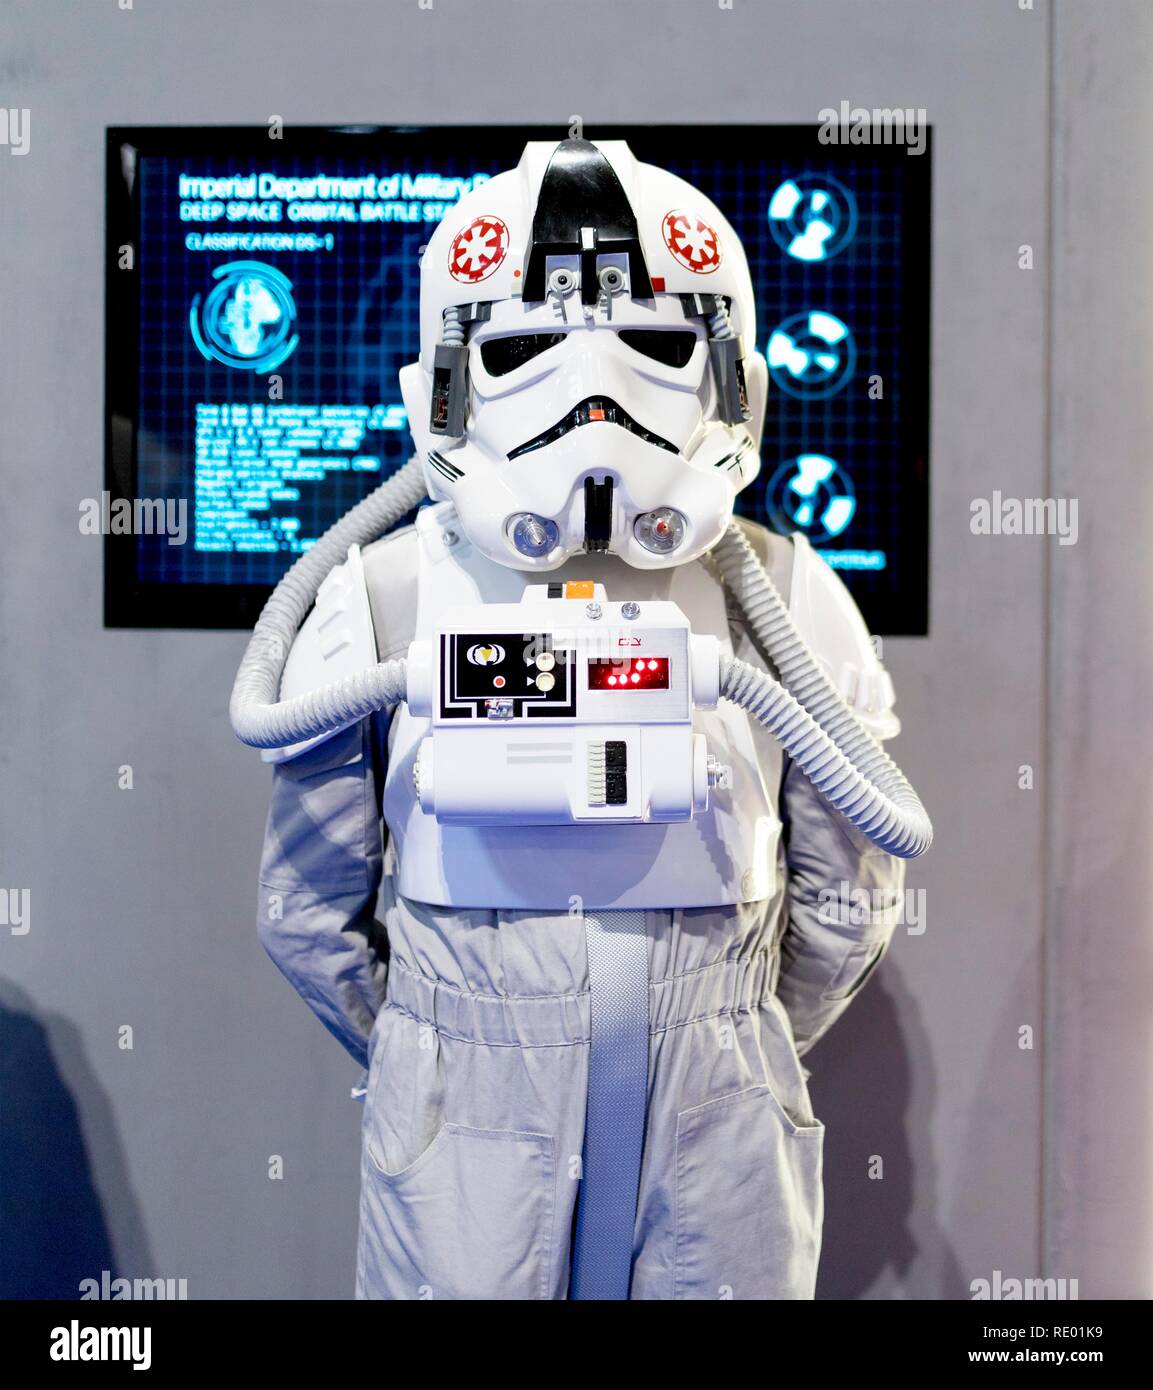 Birmingham, UK - March 17, 2018. A child cosplayer dressed in a small Storm Trooper costume from Star Wars movies at a comic con in Birmingham, UK Stock Photo